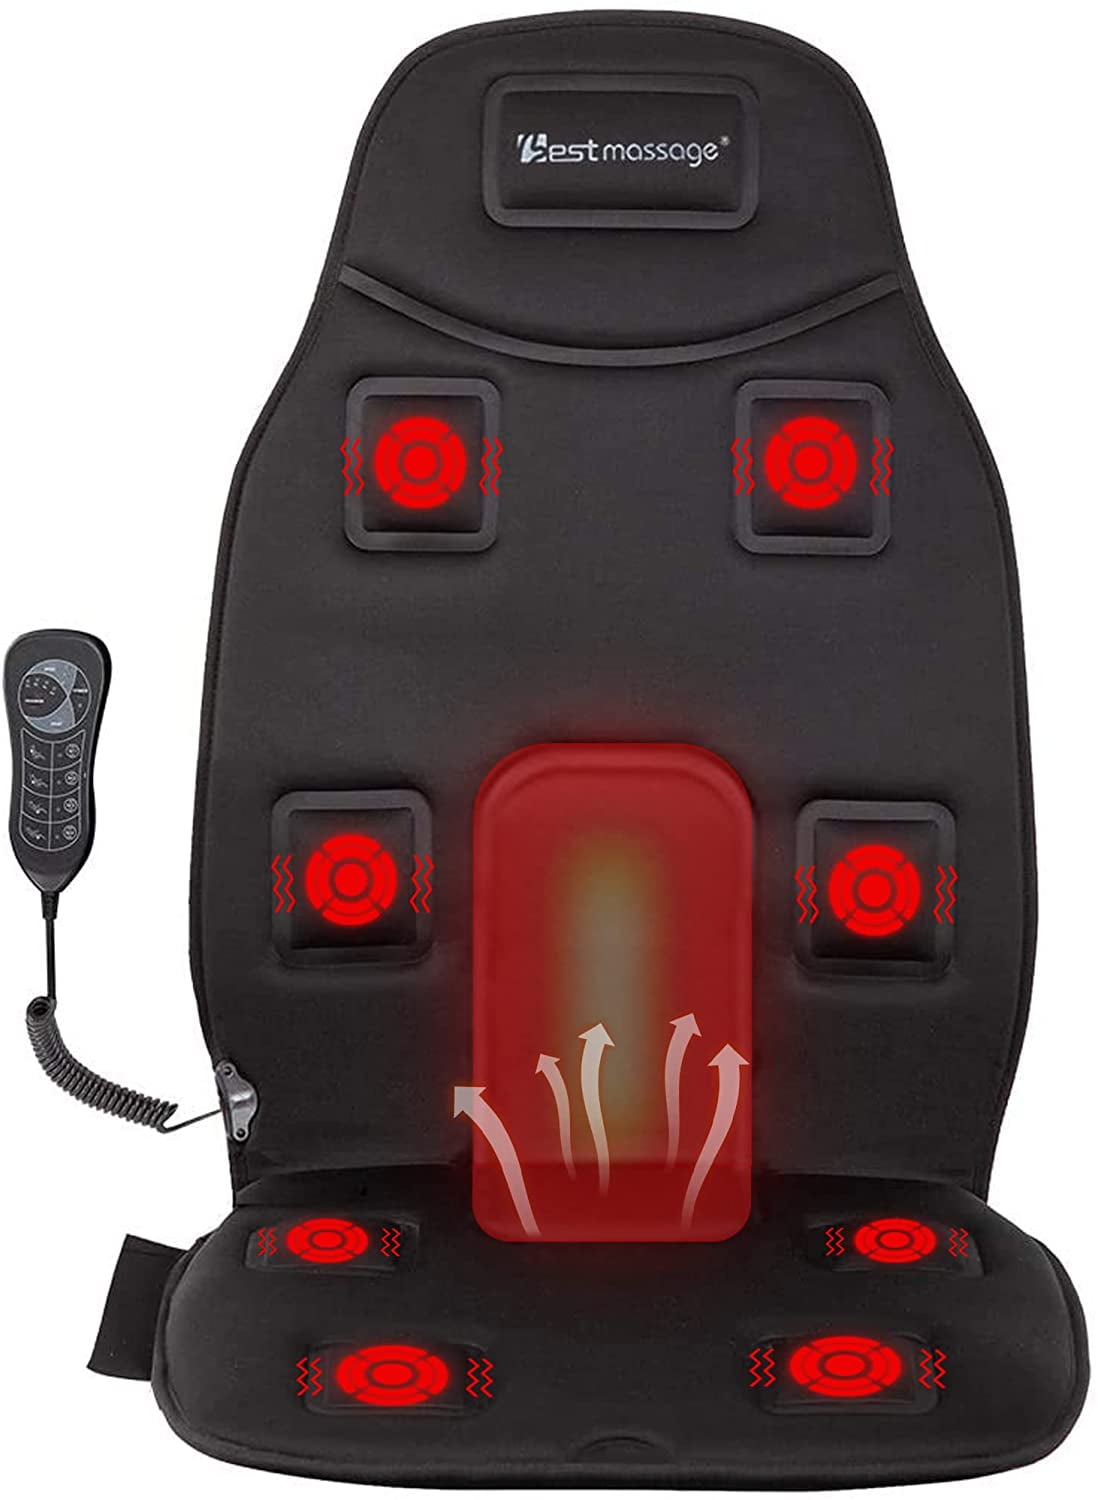 BestMassage 8-Motor Vibration Full Back Heated Car Seat for Home Seat Use Walmart.com